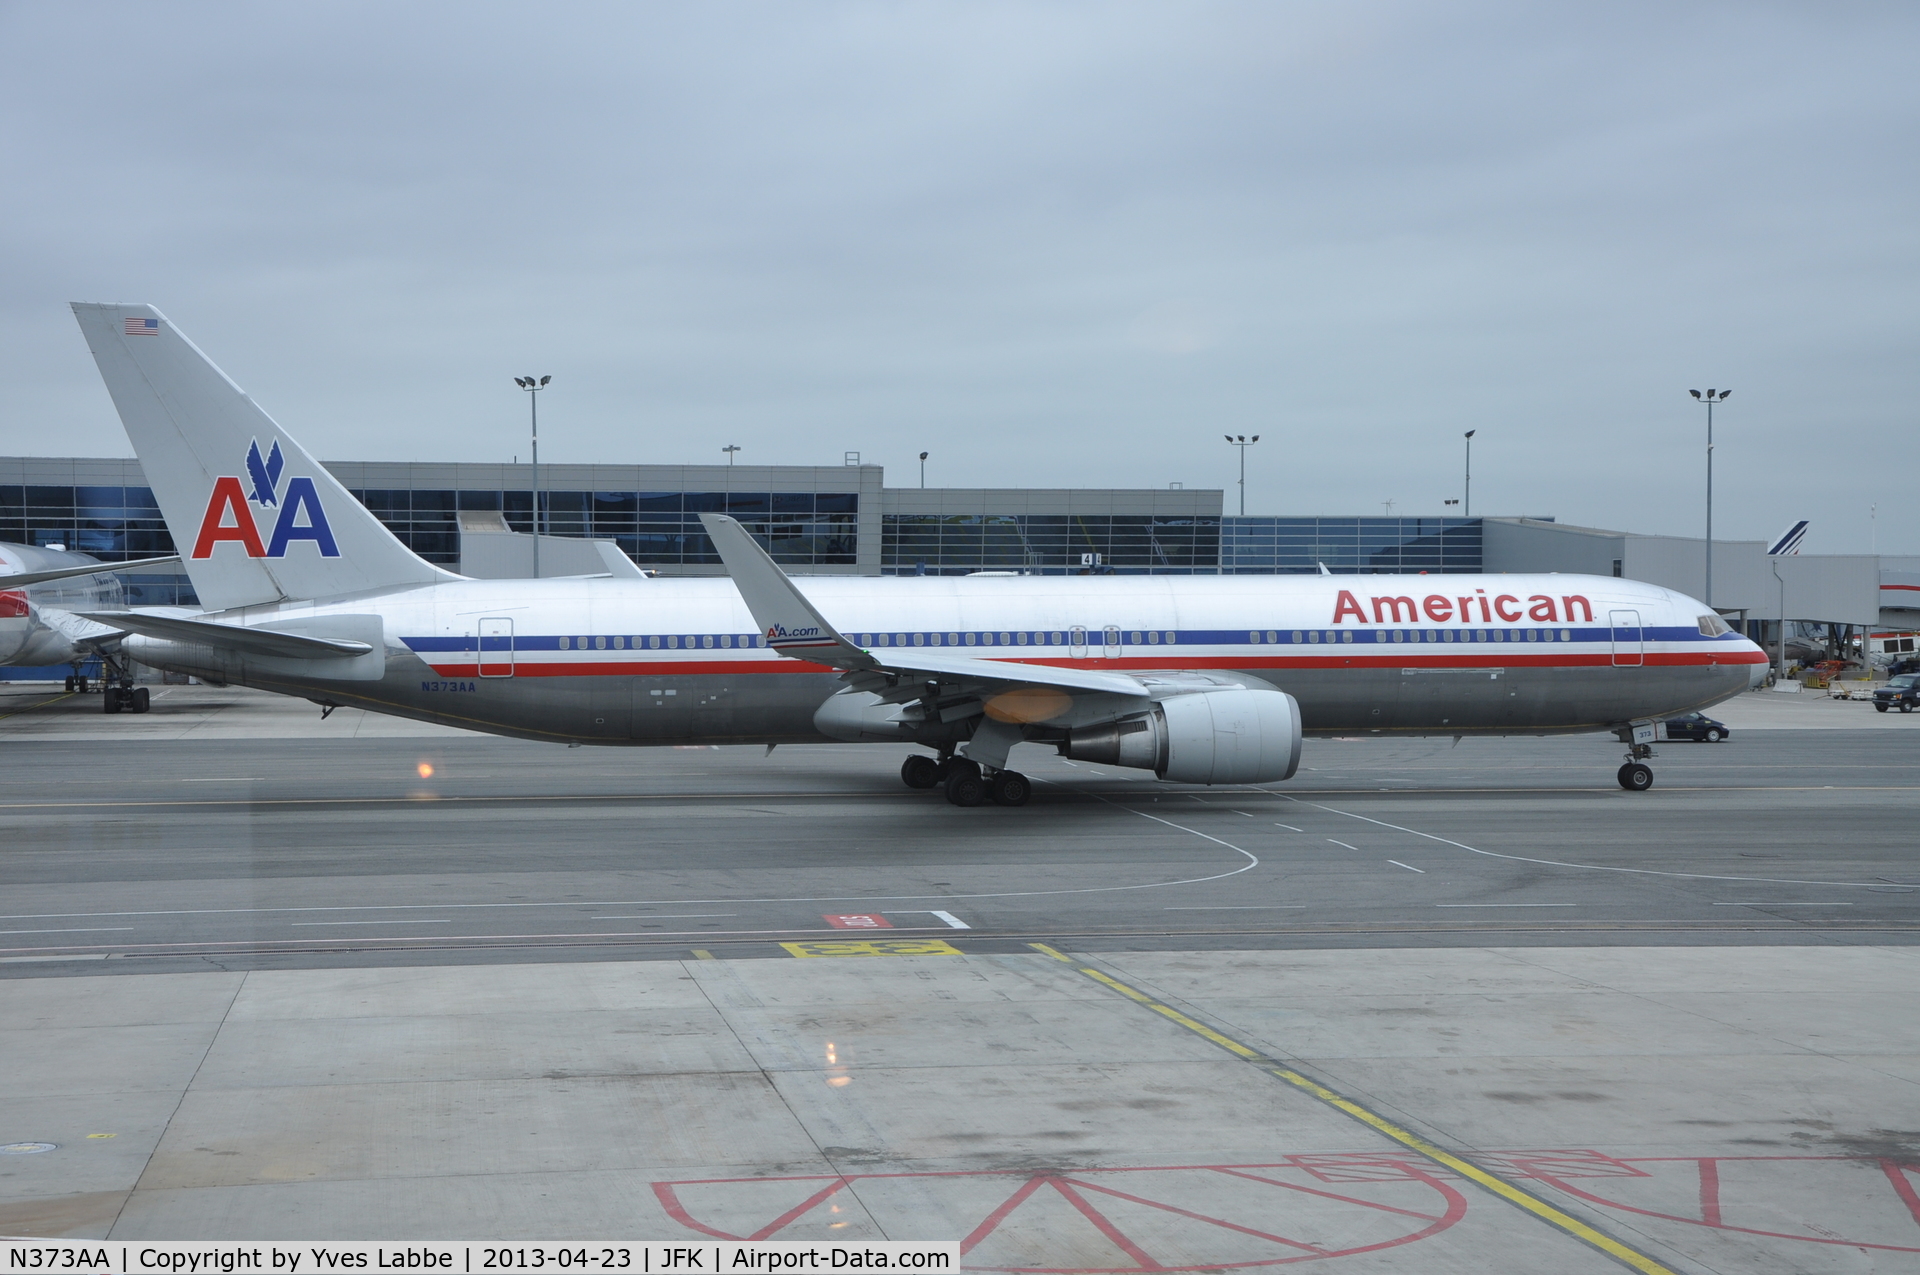 N373AA, 1992 Boeing 767-323 C/N 25200, Ready for take off at JFK airport on April 23 2013